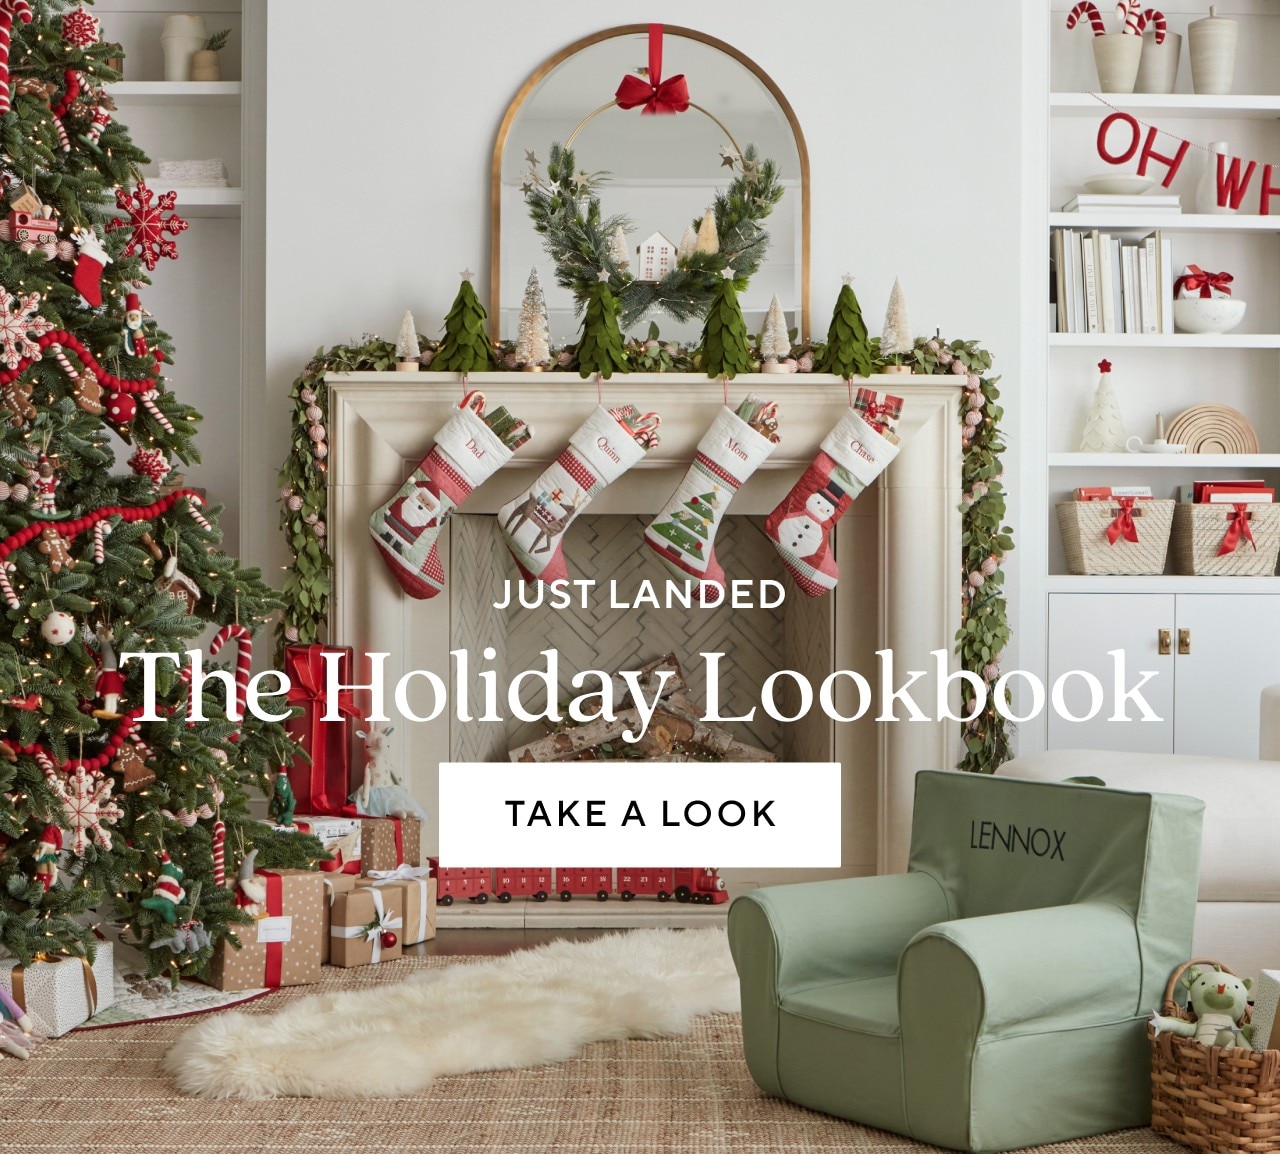 INTRODUCING THE HOLIDAY LOOKBOOK